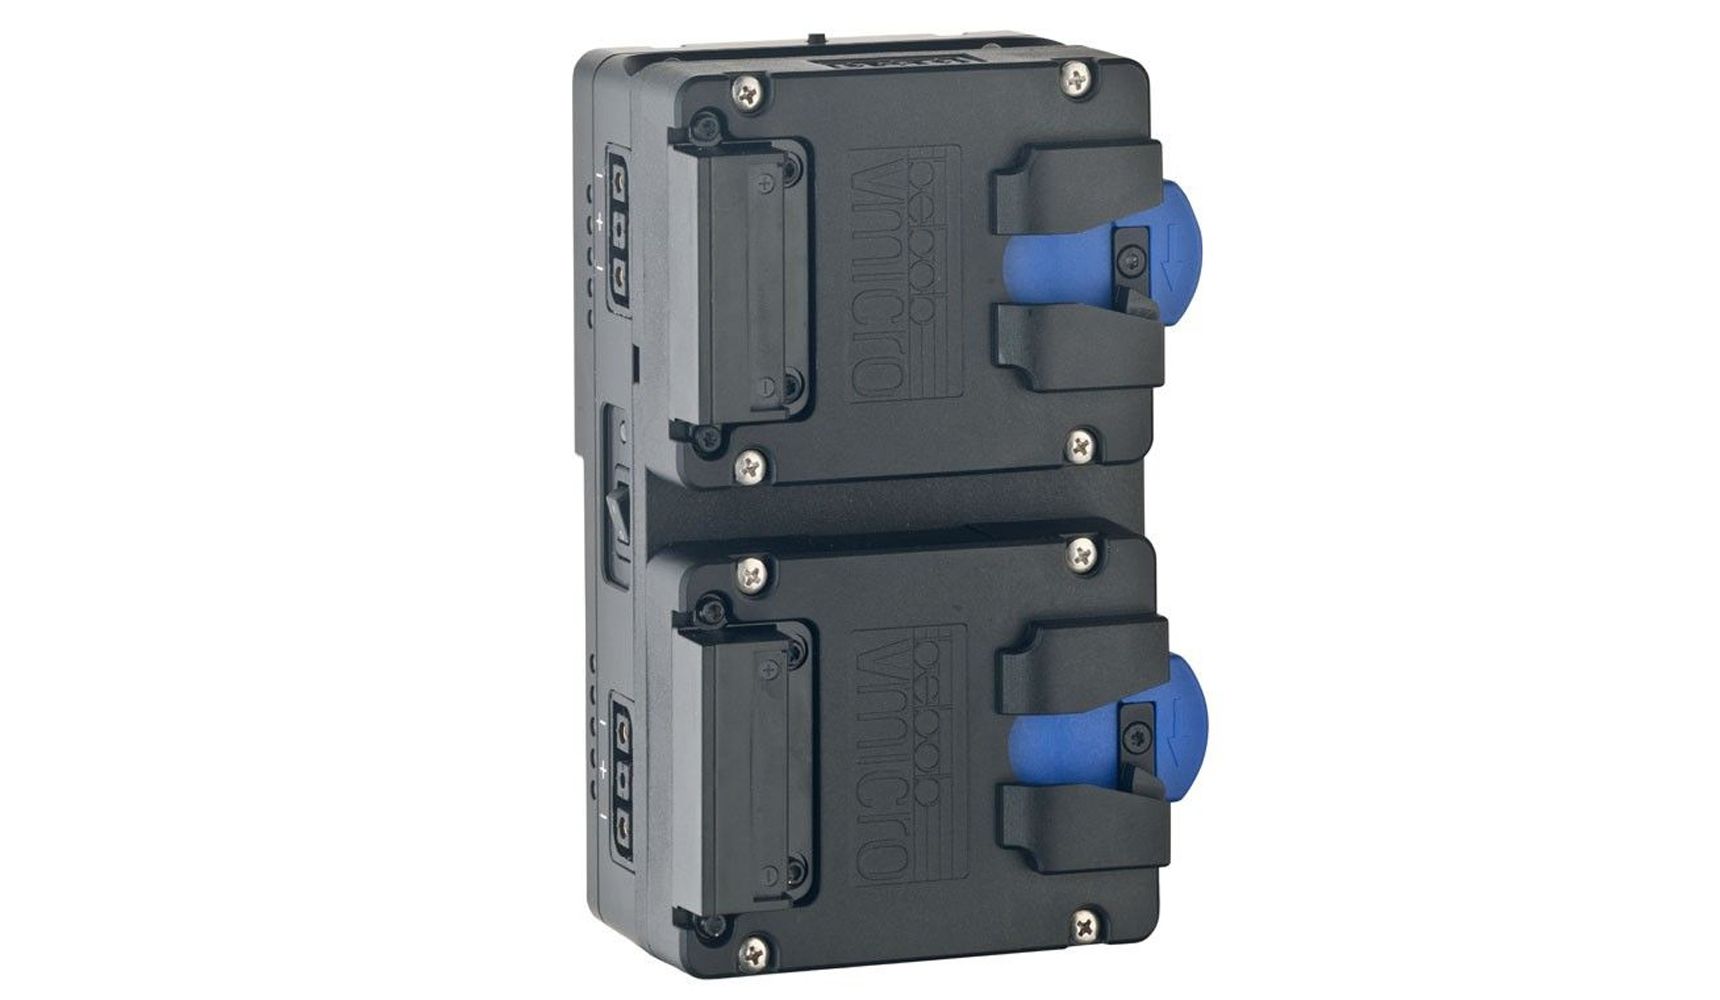 COCO-VMICRO2 Double micro V-mount adapter plate with hotswap bis